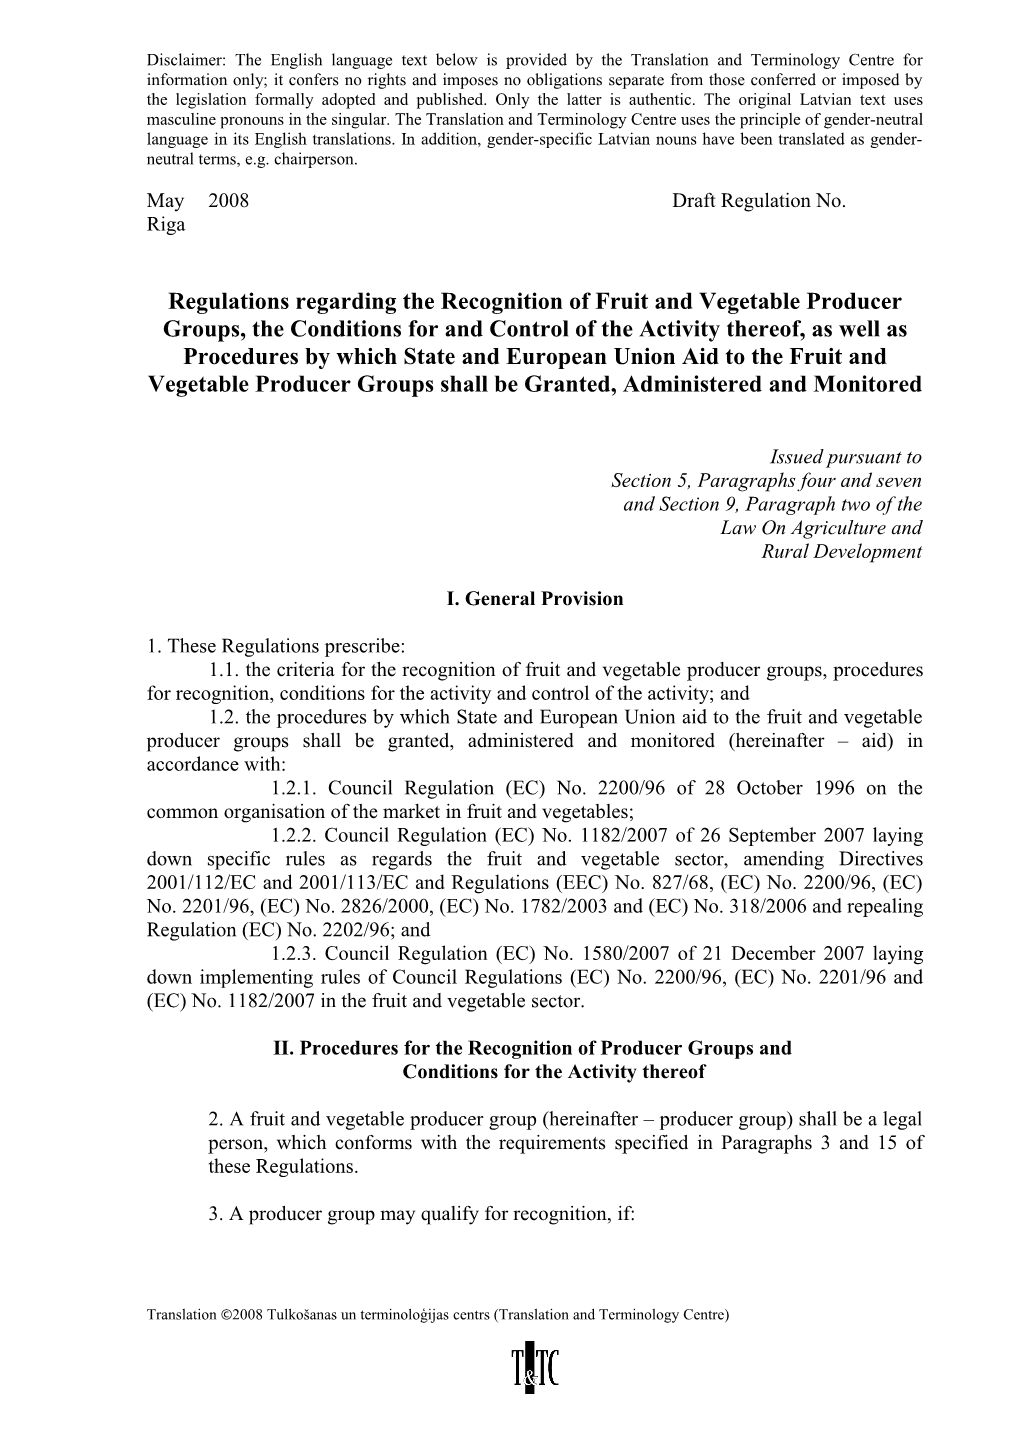 Regulations Regarding the Recognition of Fruit and Vegetable Producer Groups, the Conditions